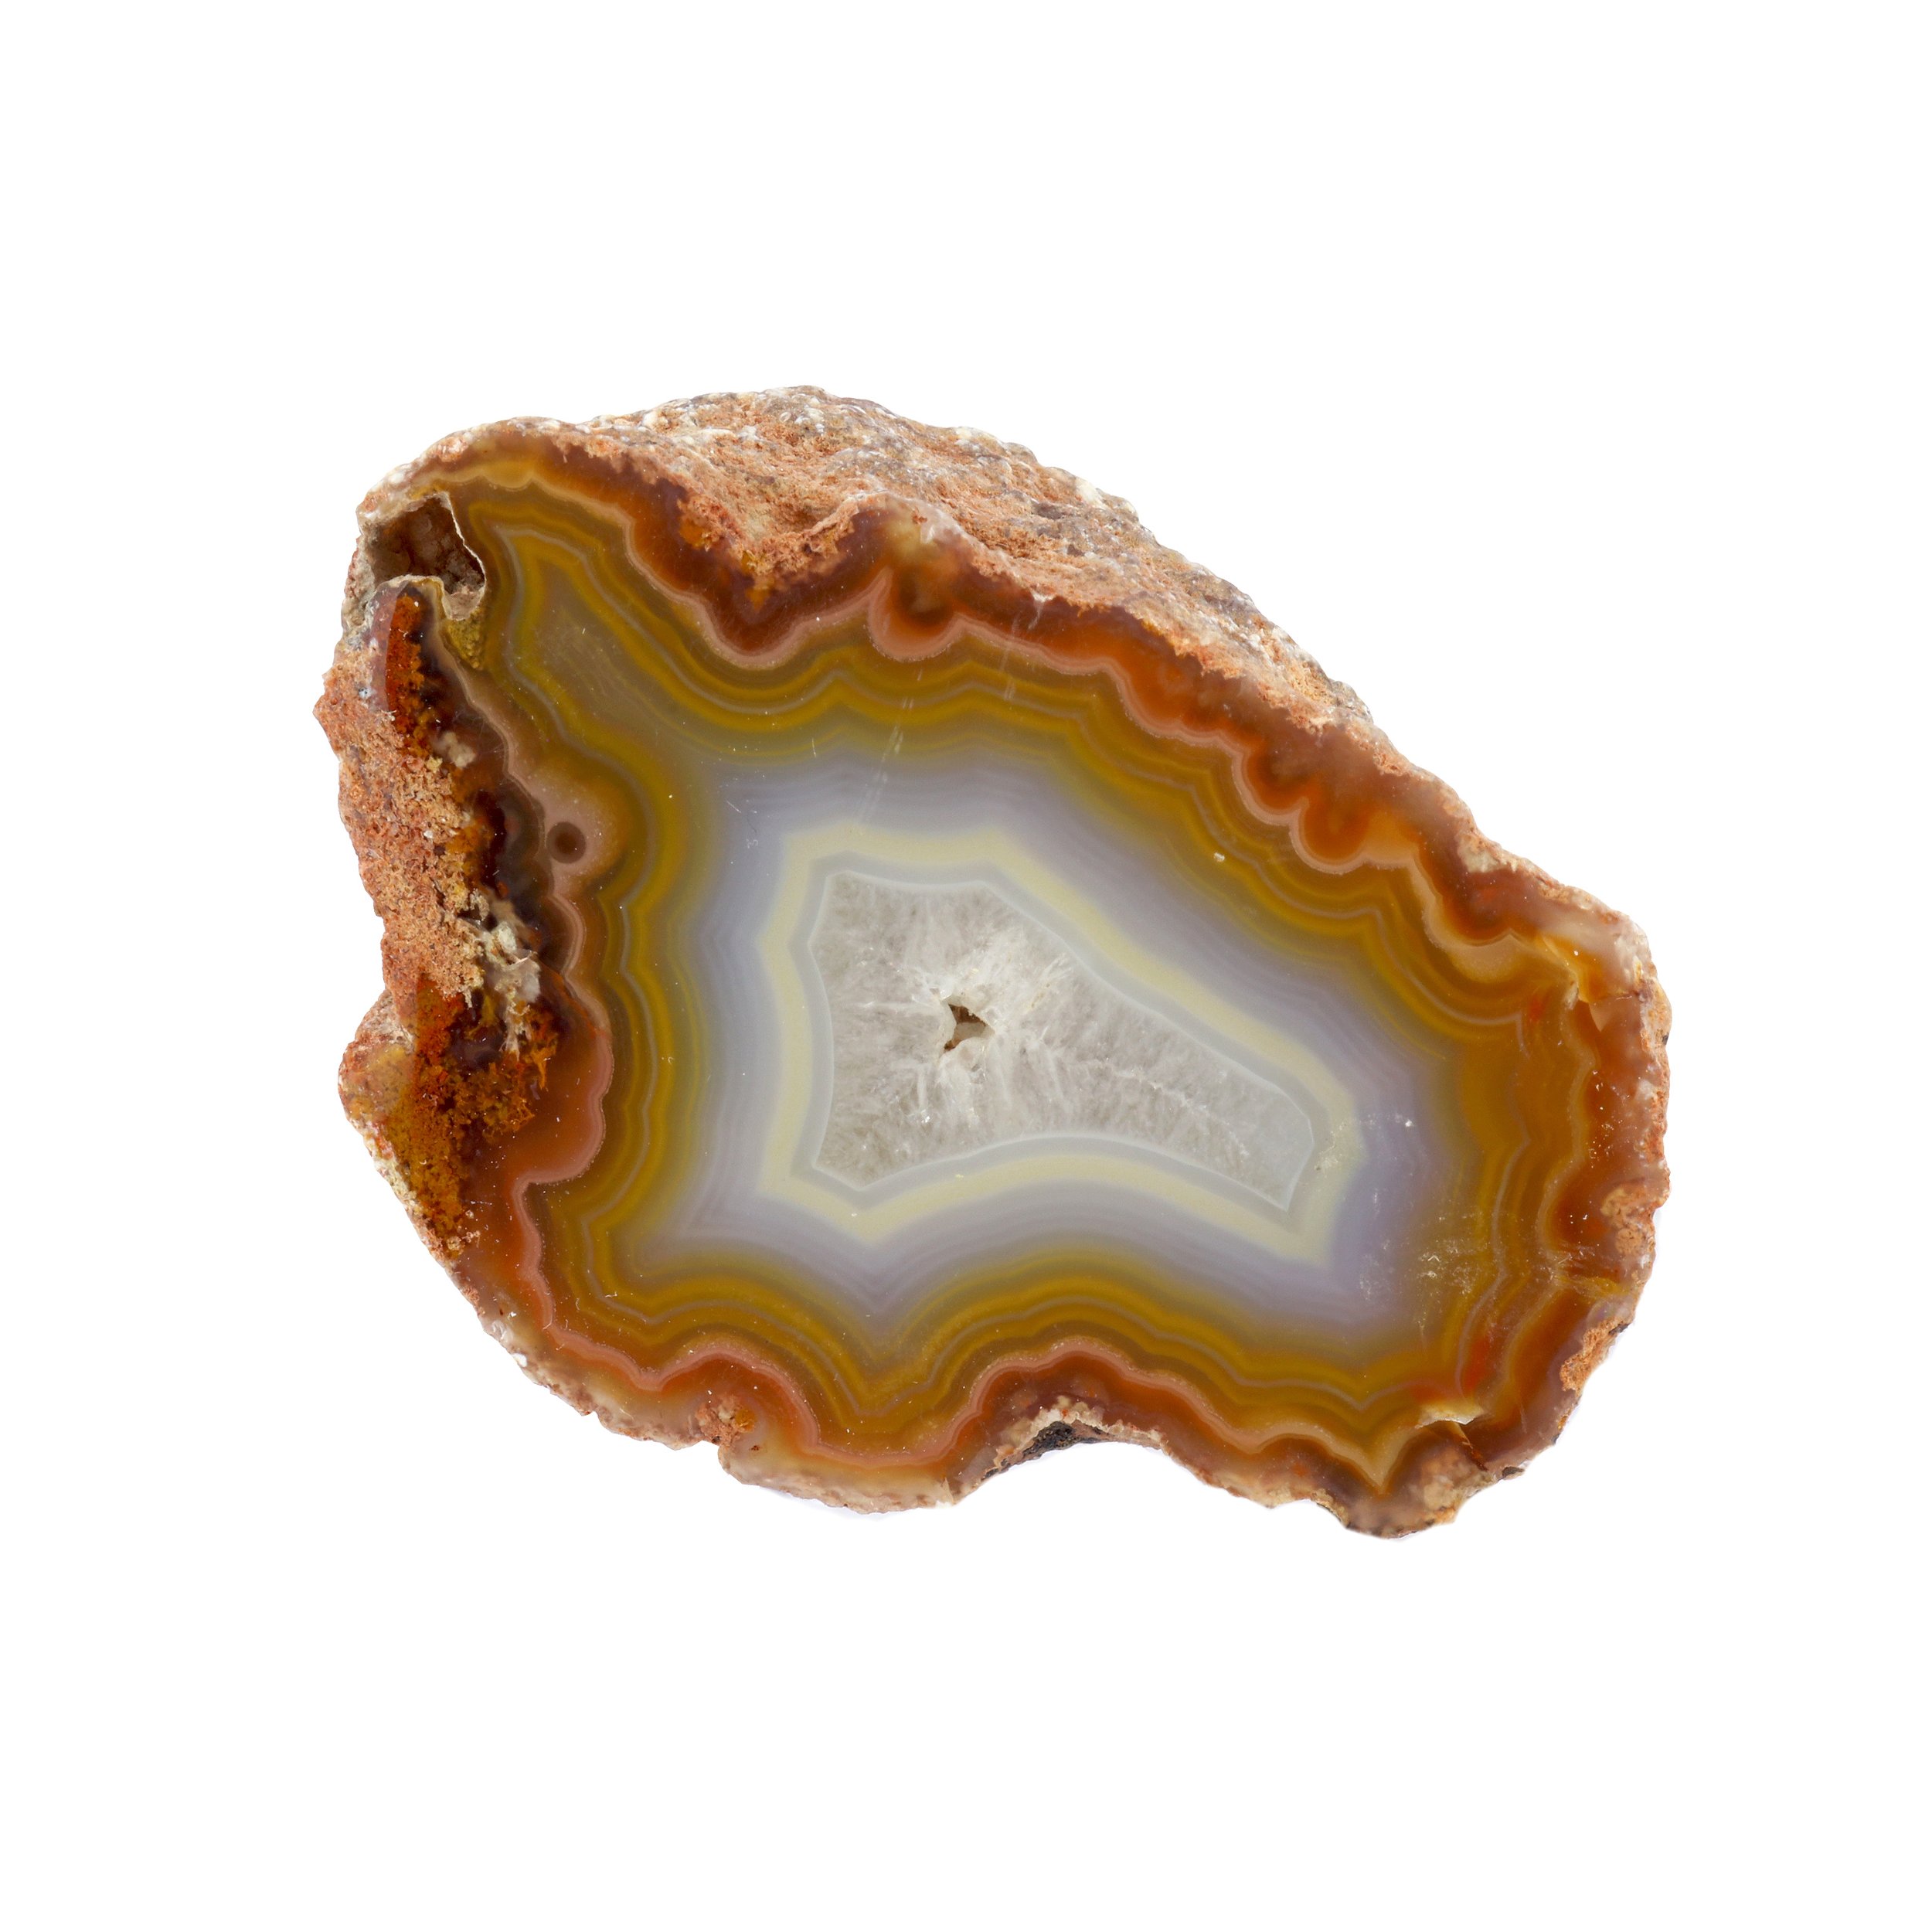 Laguna Agate Geode - Amber Yellow Band With A Blue White And Druze Center